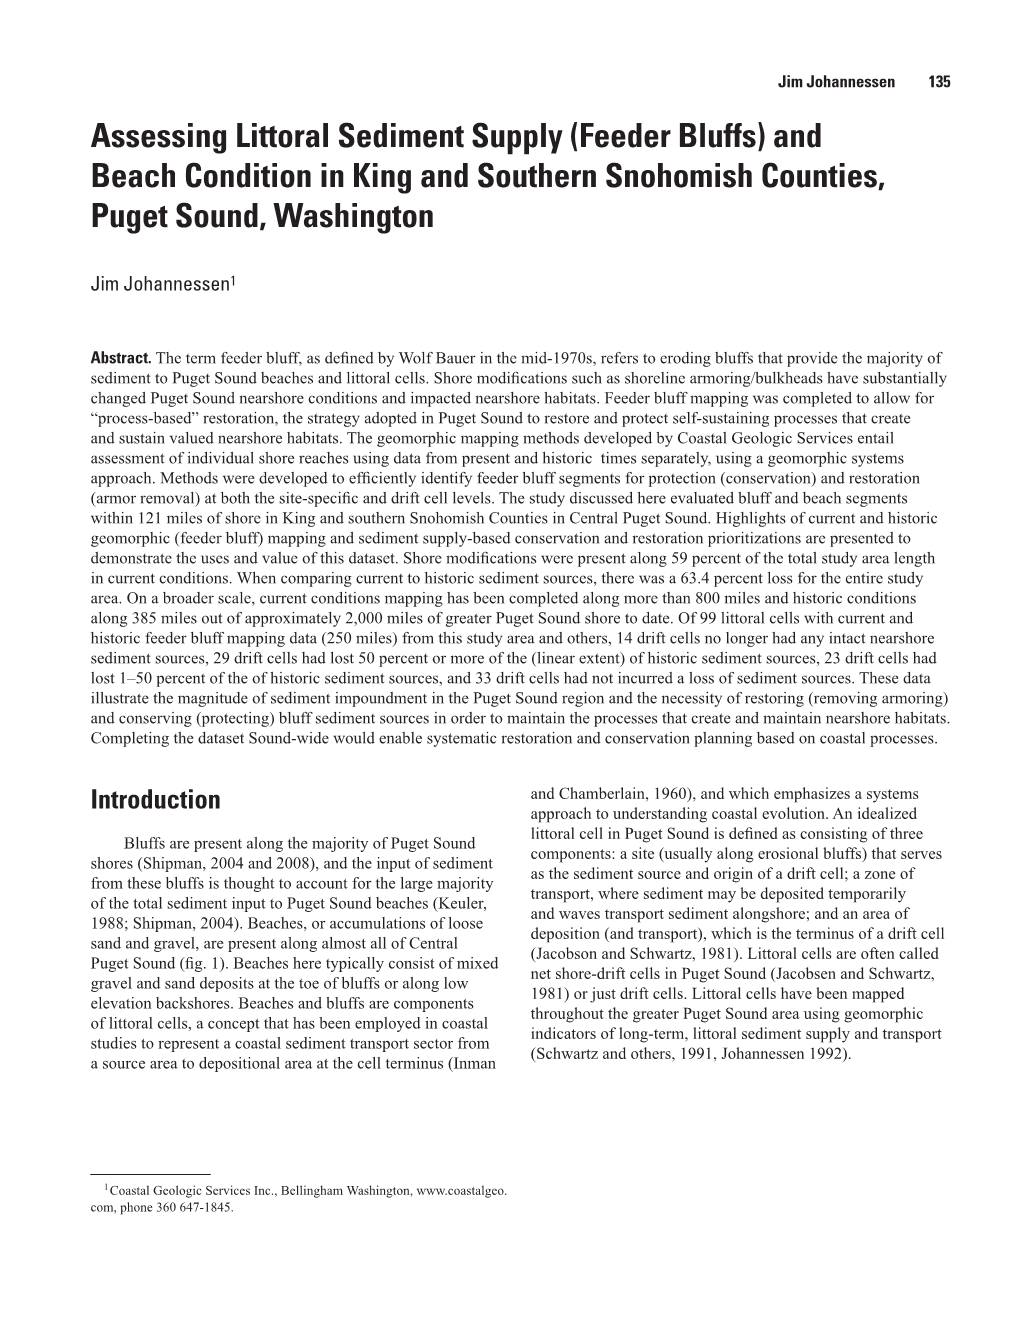 Assessing Littoral Sediment Supply (Feeder Bluffs) and Beach Condition in King and Southern Snohomish Counties, Puget Sound, Washington